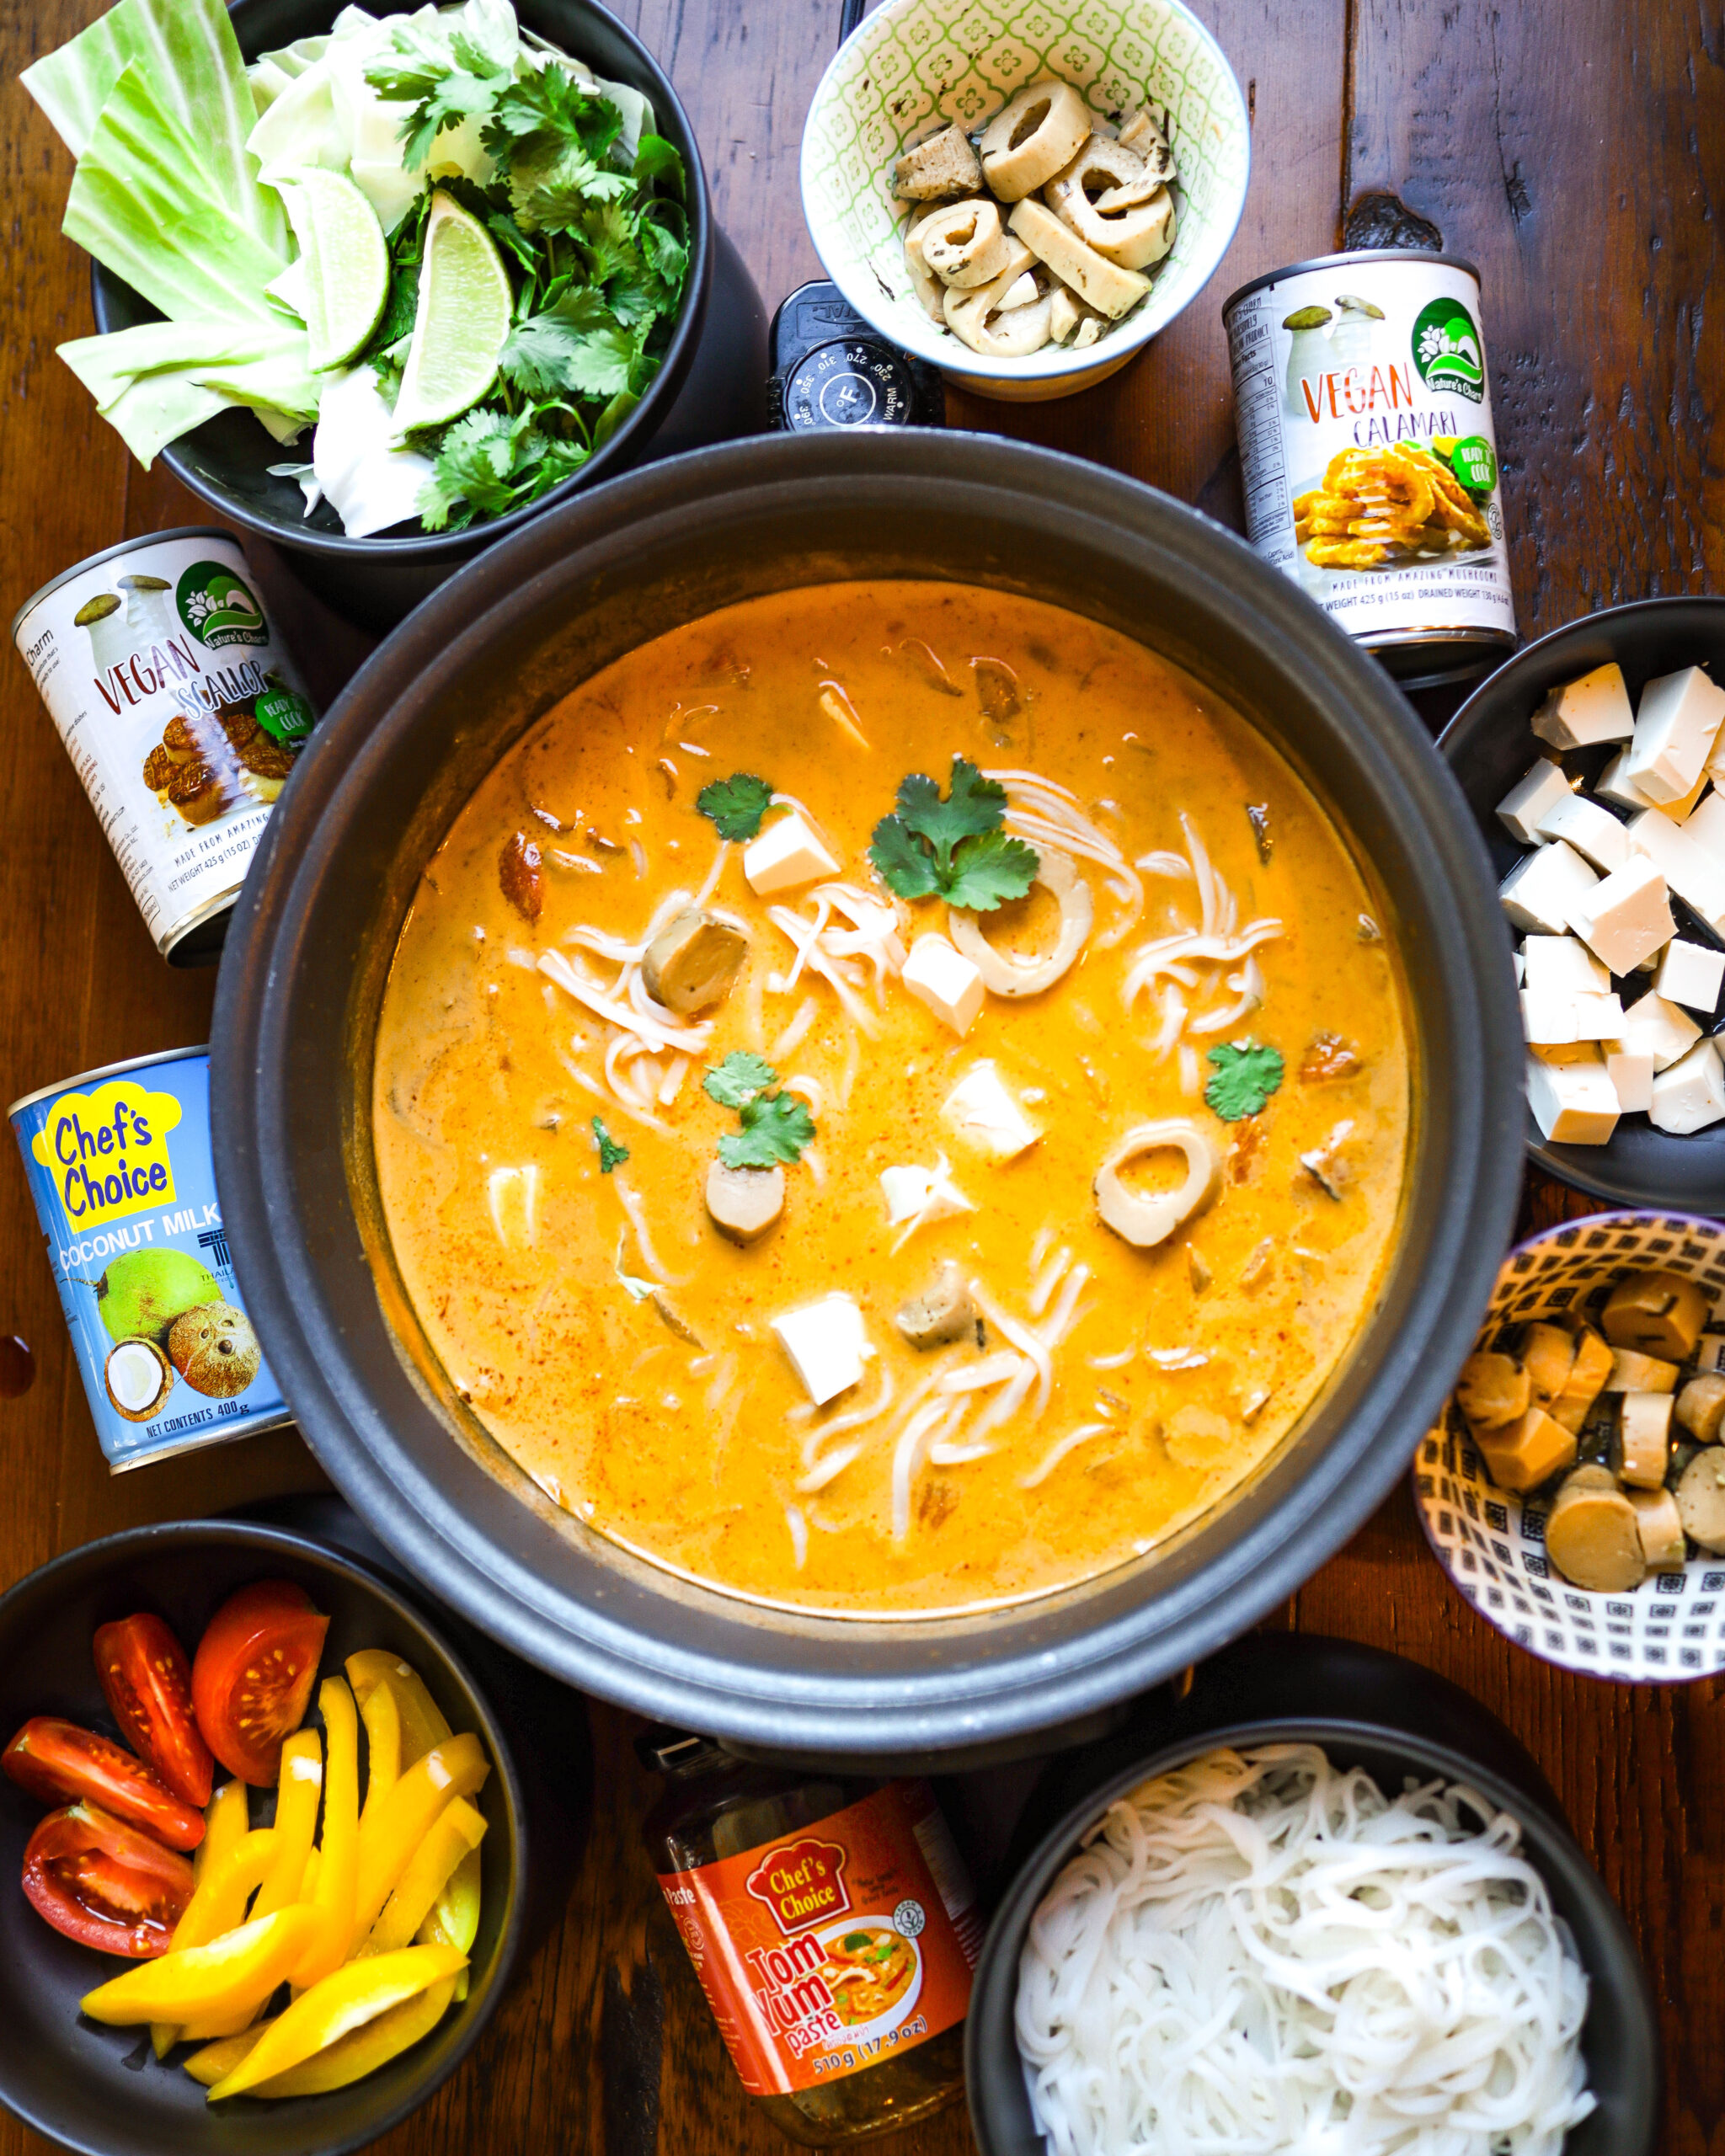 Whip up a quick and healthy vegan feast with this 20-Minute Vegan Hot Pot! Packed with the nutritious goodness of king oyster mushrooms, and bursting with the exotic flavors of Tom Yum and creamy coconut milk, this recipe is perfect for a speedy, yet satisfying plant-based meal. Dive into this delicious, easy-to-make hot pot that's not just good for you, but also a treat for your taste buds. Pin this for your next vegan culinary adventure! #VeganHotPot #HealthyEating #QuickVeganMeals #PlantBasedDelight #CoconutMilkRecipes #TomYumFlavors #VeganCooking